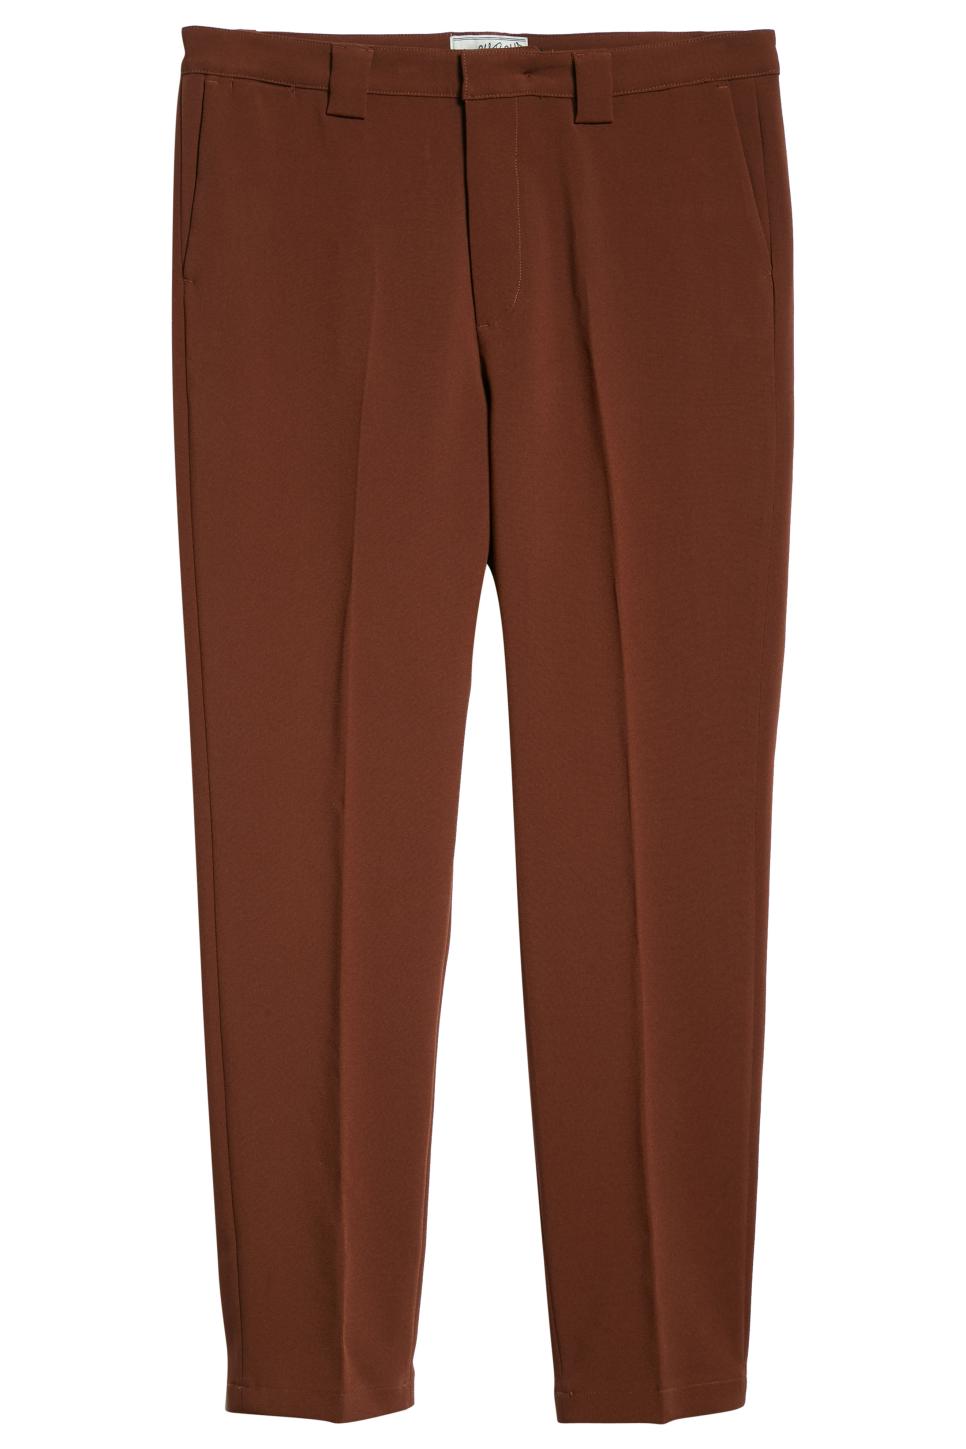 Bogey Boys Tailored Fit Flat Front Golf Pants